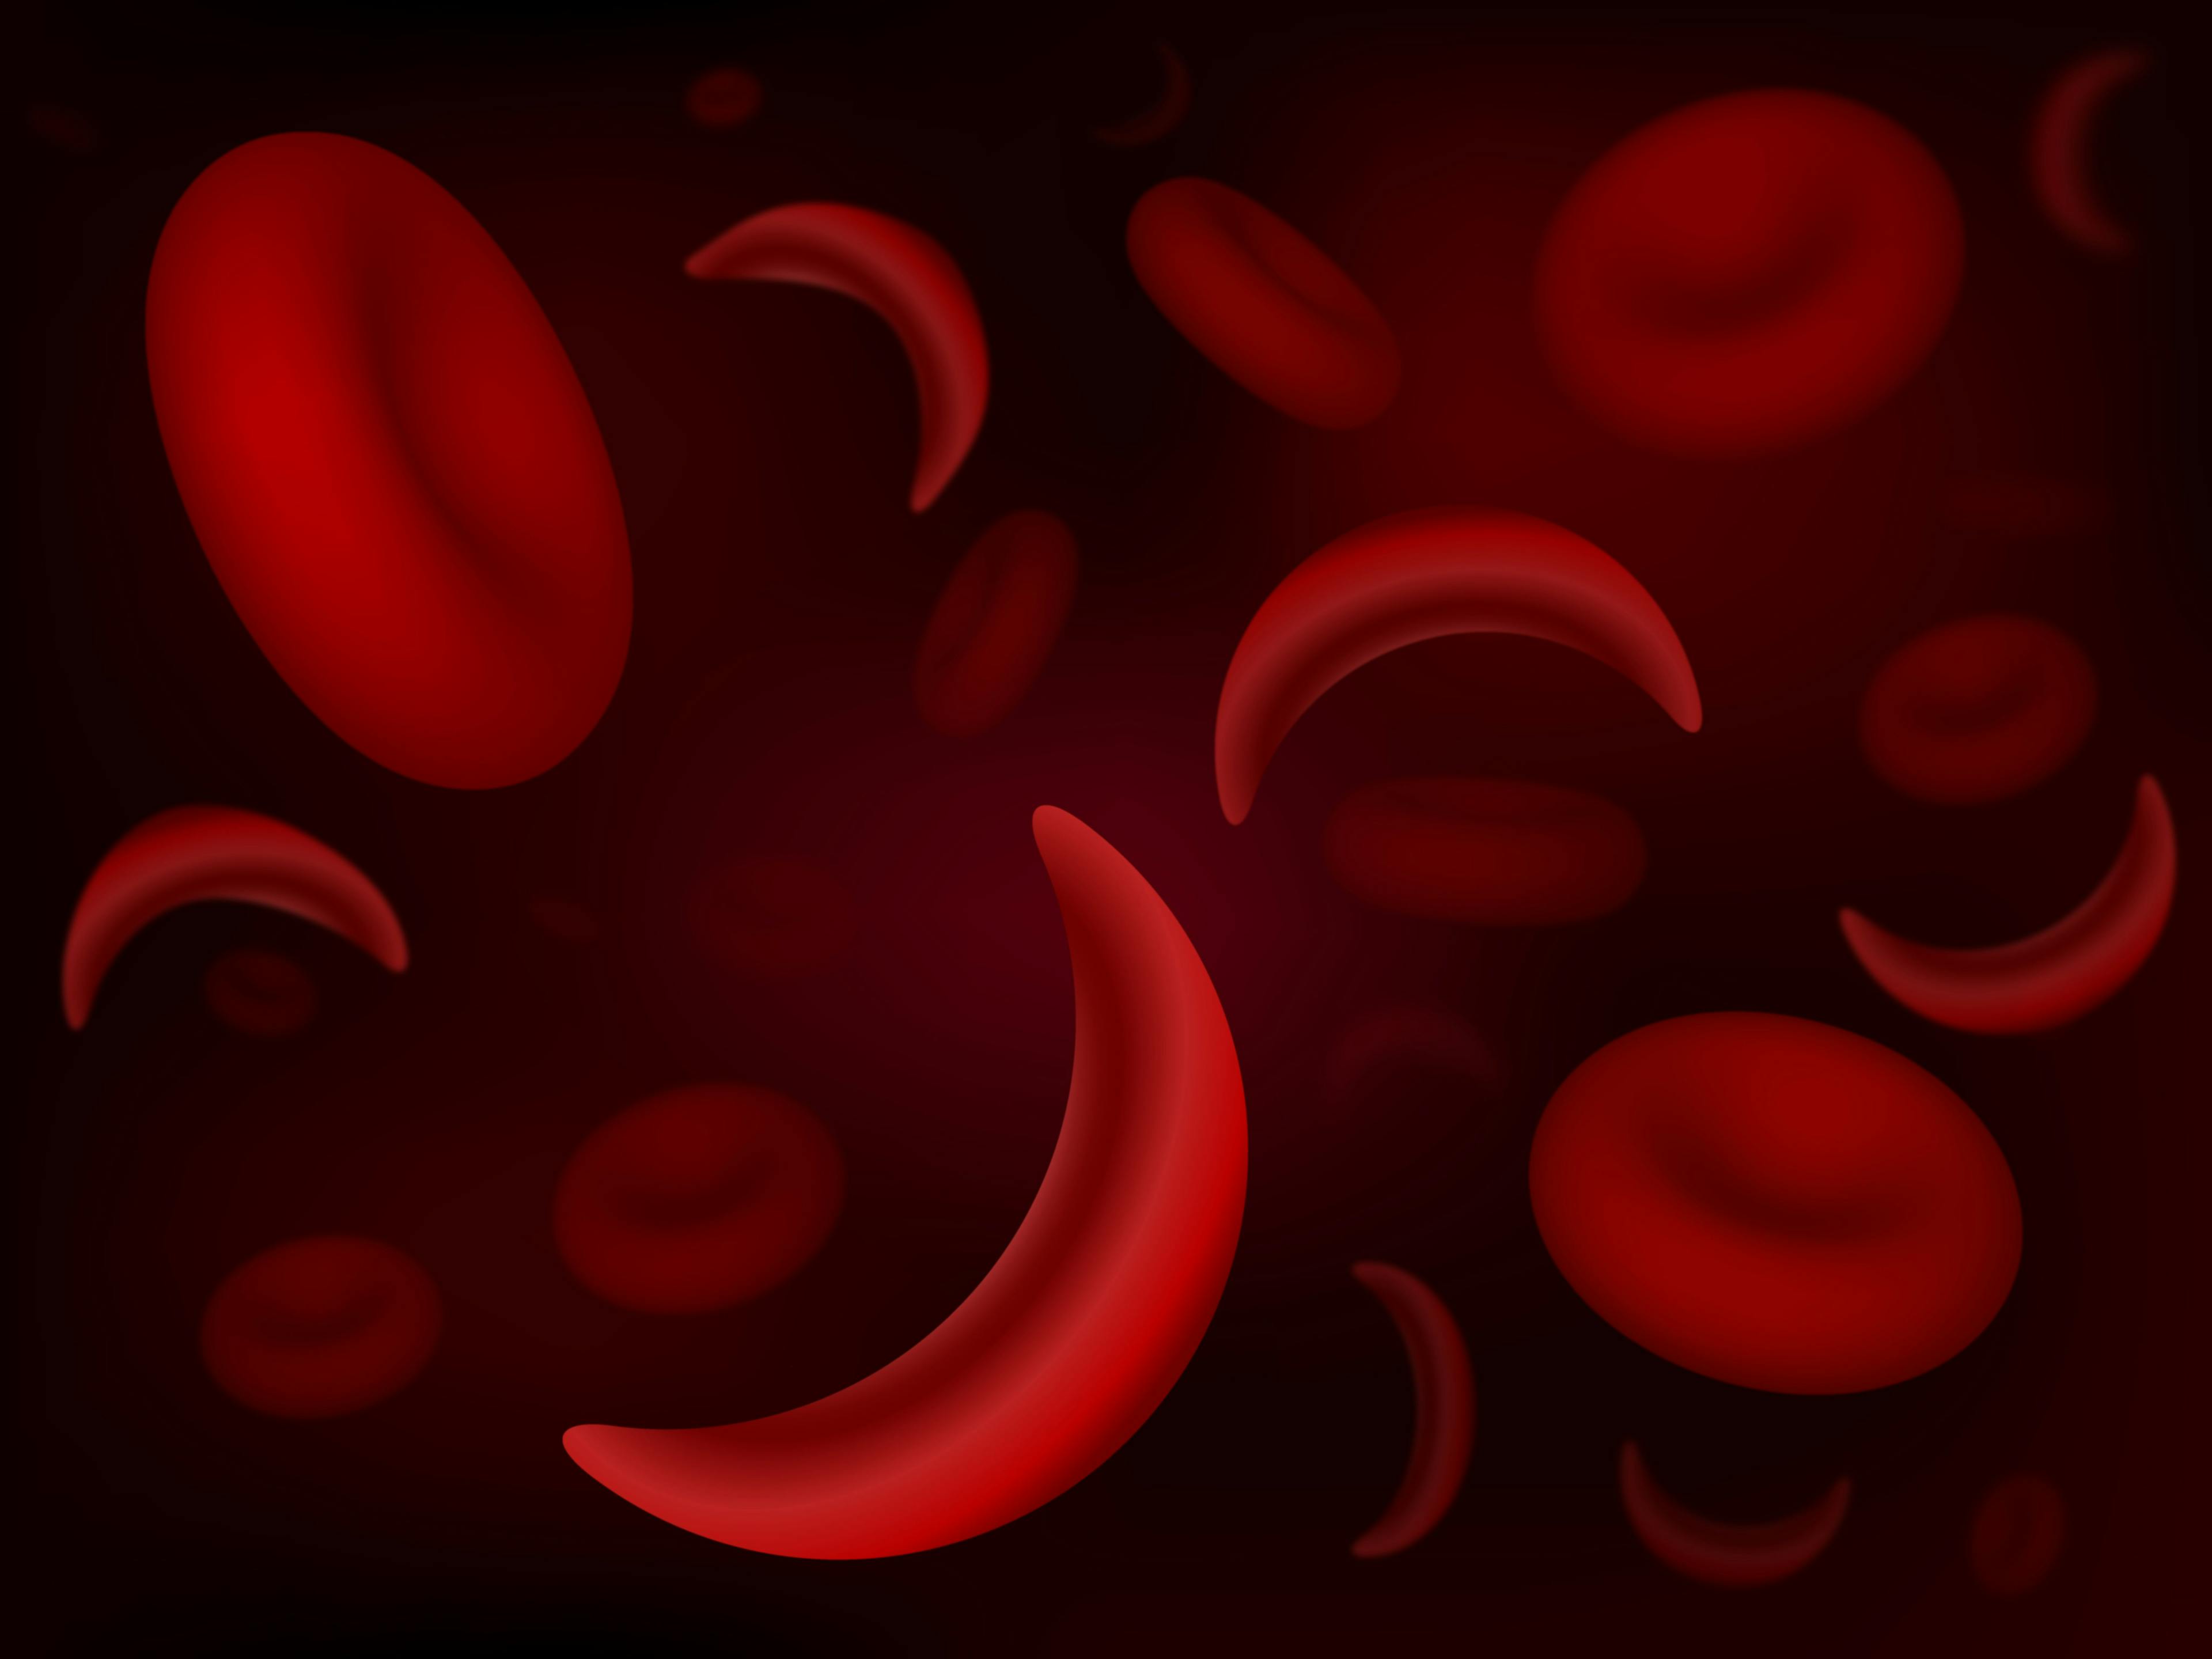 Sickle cell image ©extender_01-stock.adobe.com